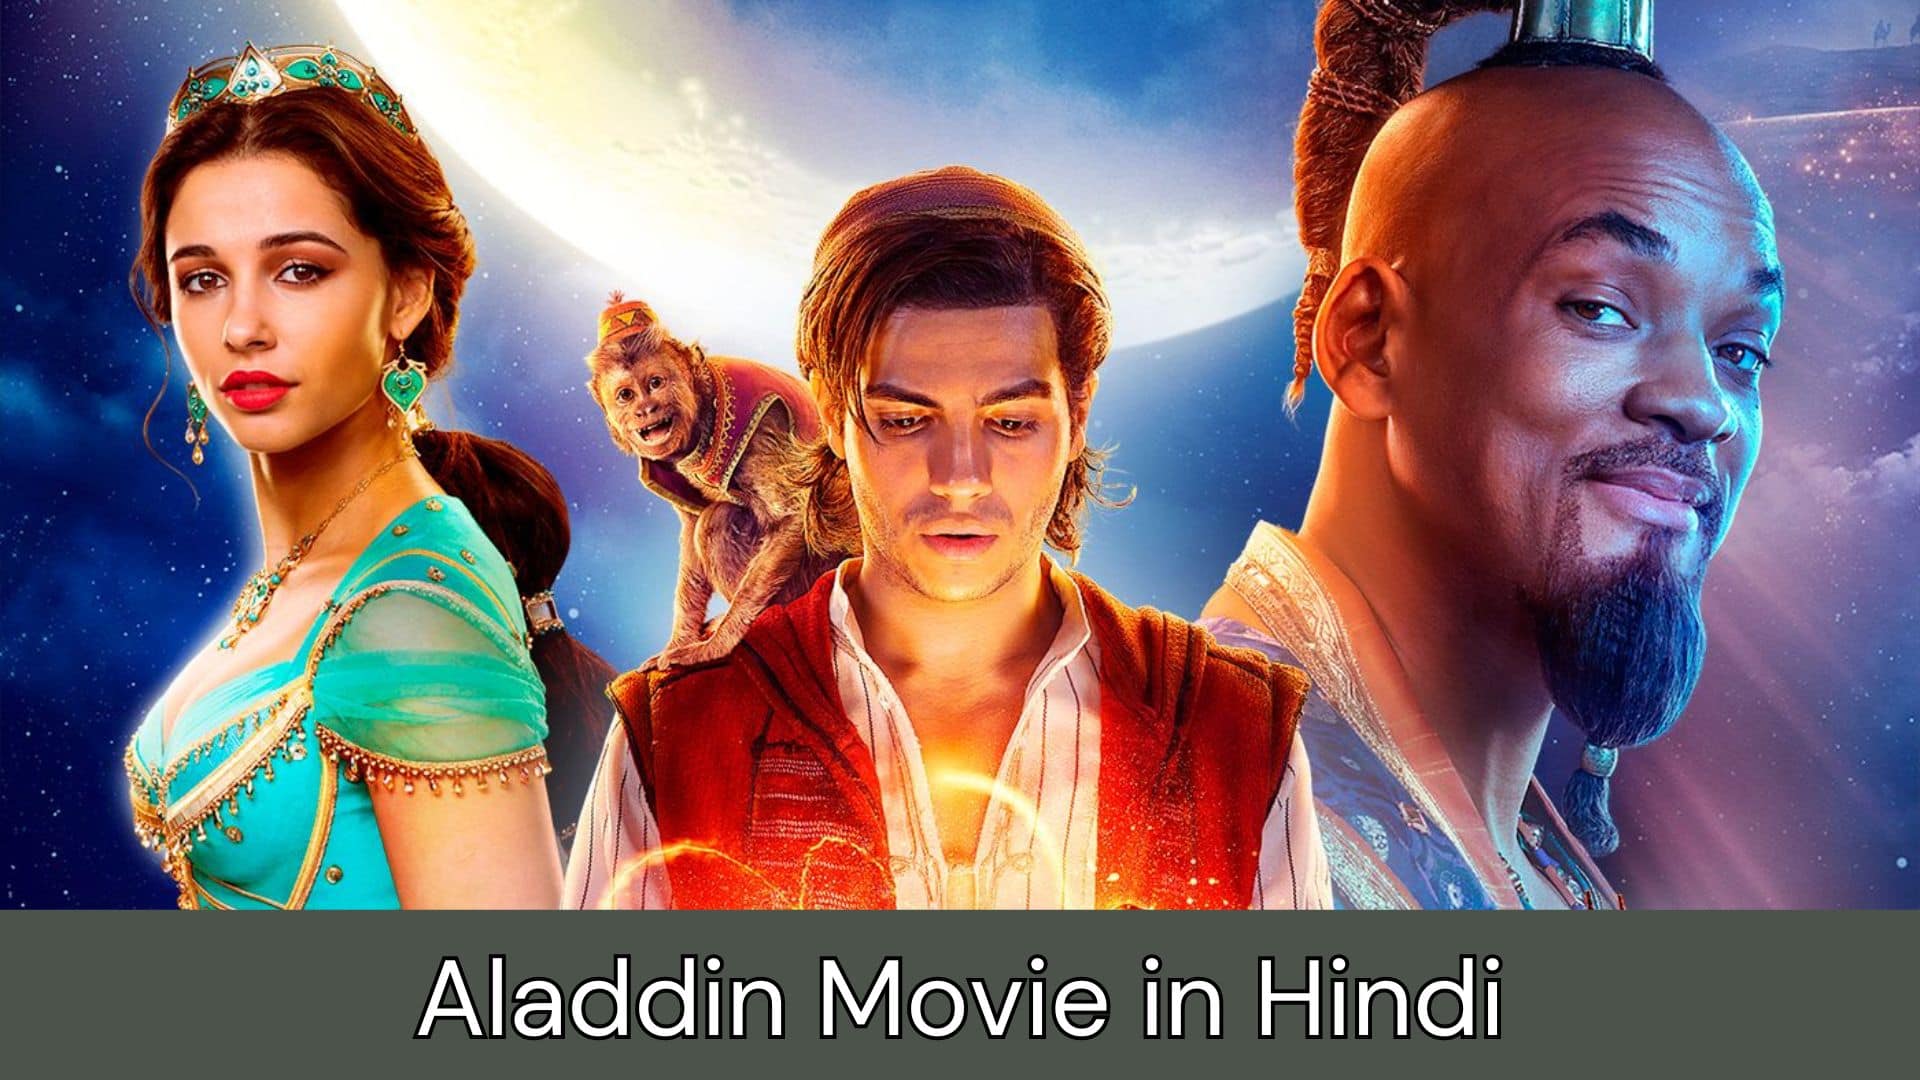 Aladdin Movie Cast, Character, Poster, Box Office